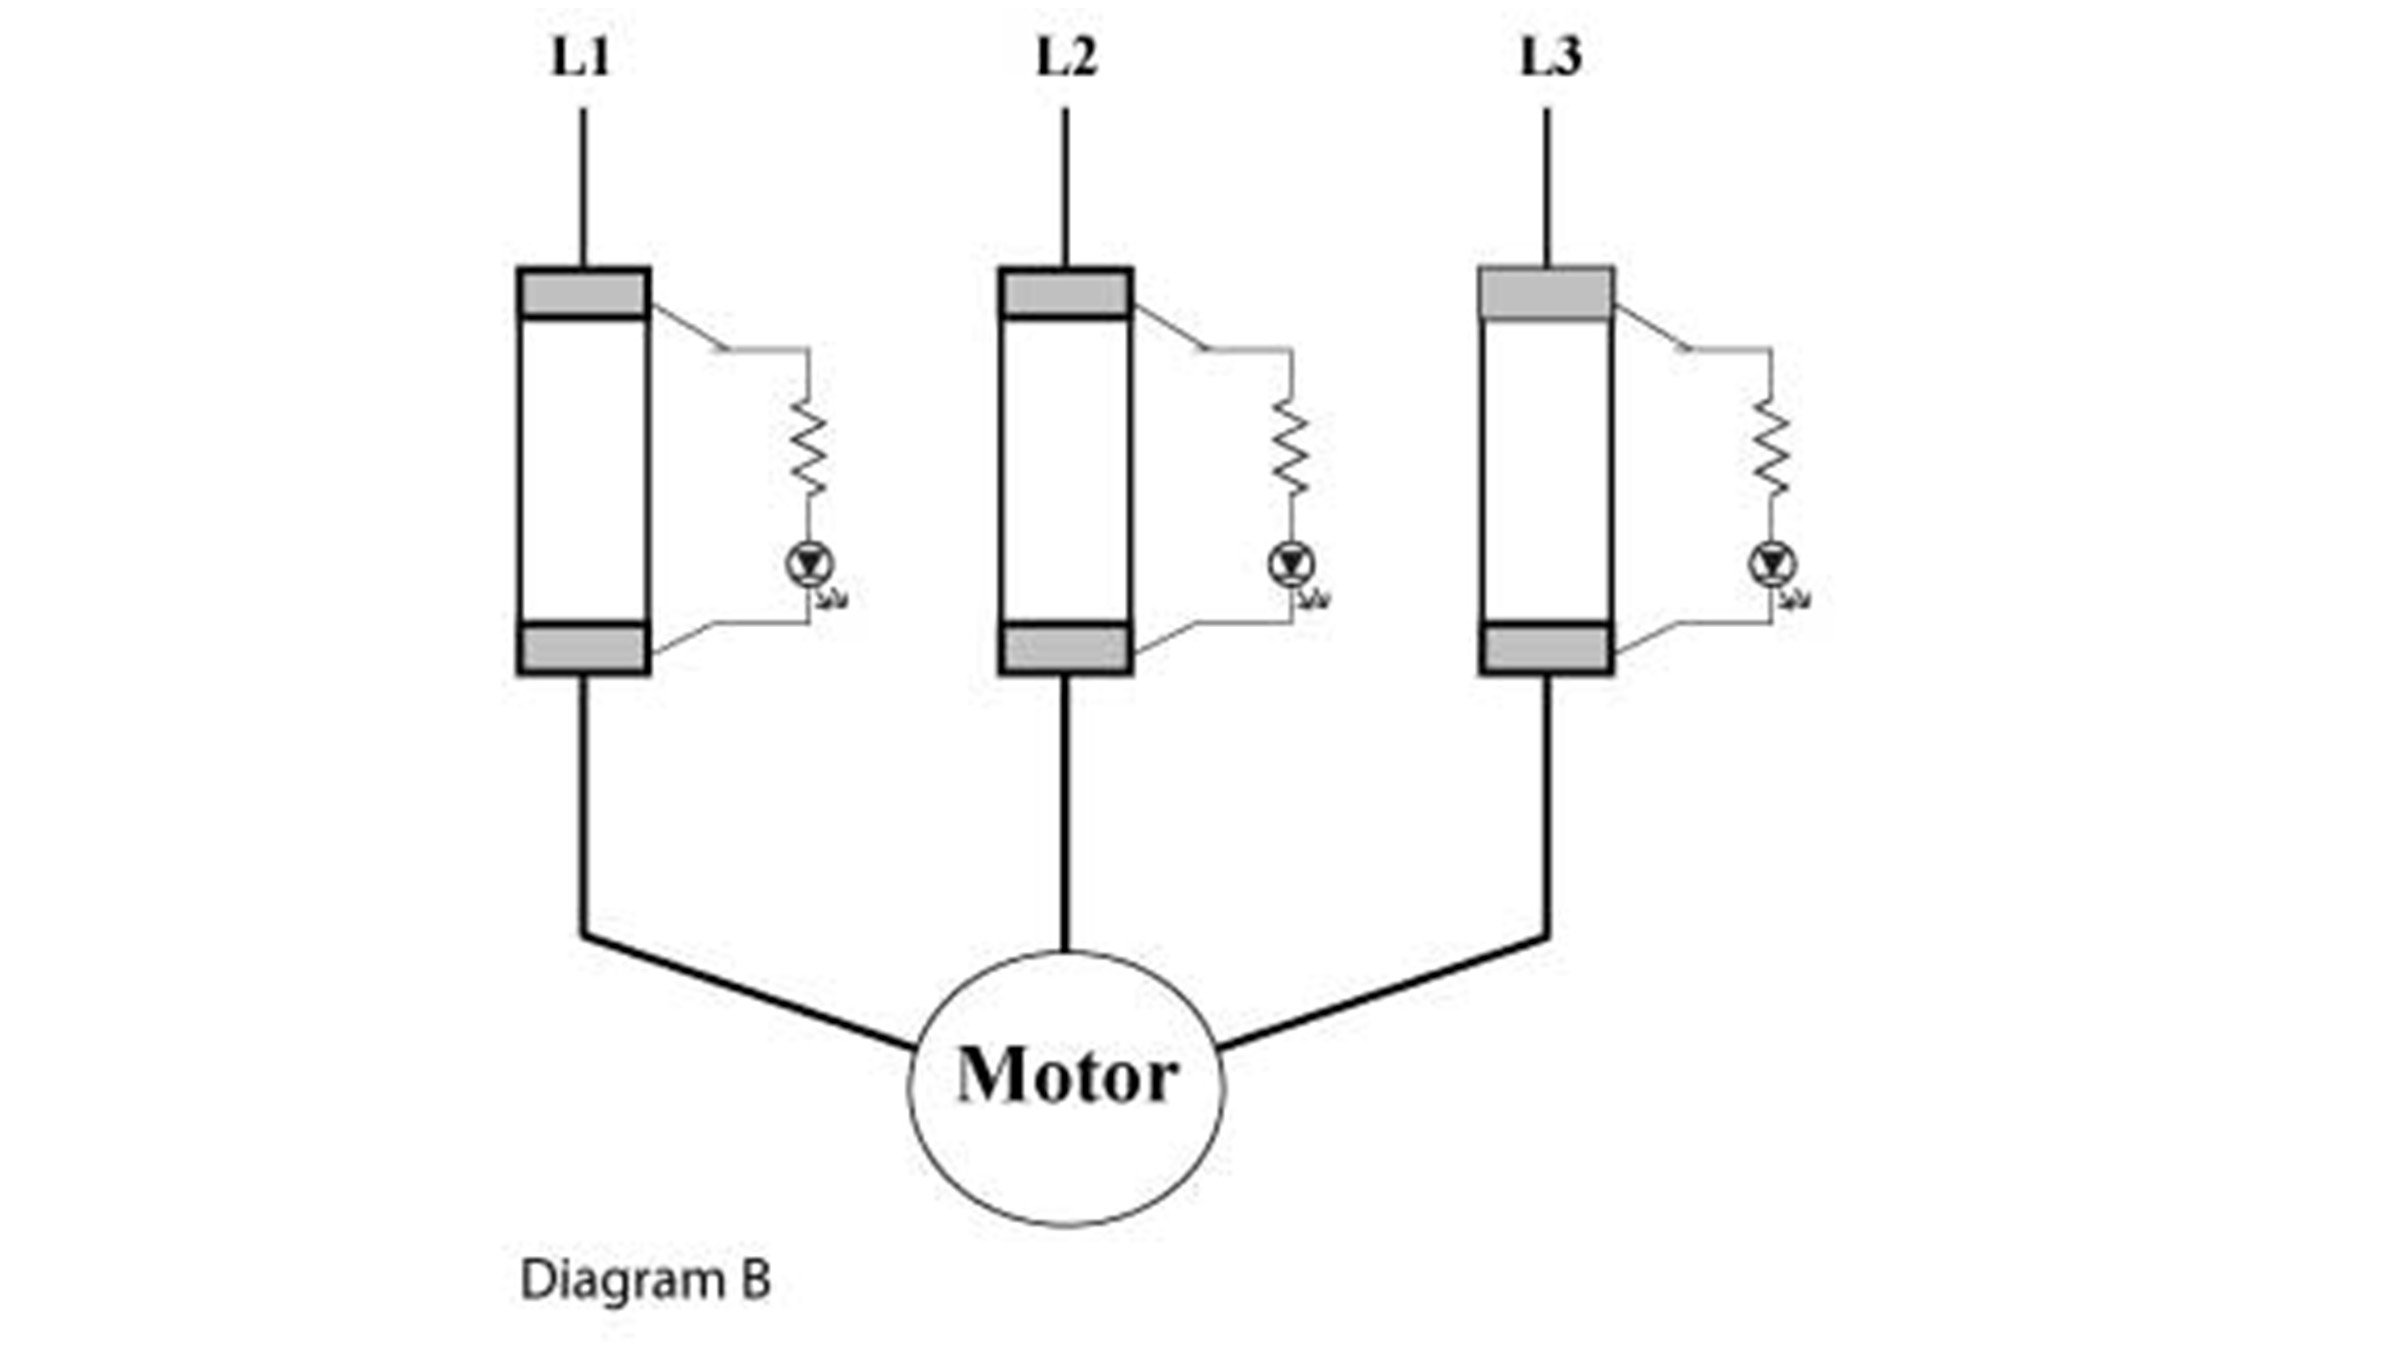 Sprecher & Schuh Dual LED Blown fuse indicator diagram When Used In An Electrical Circuit